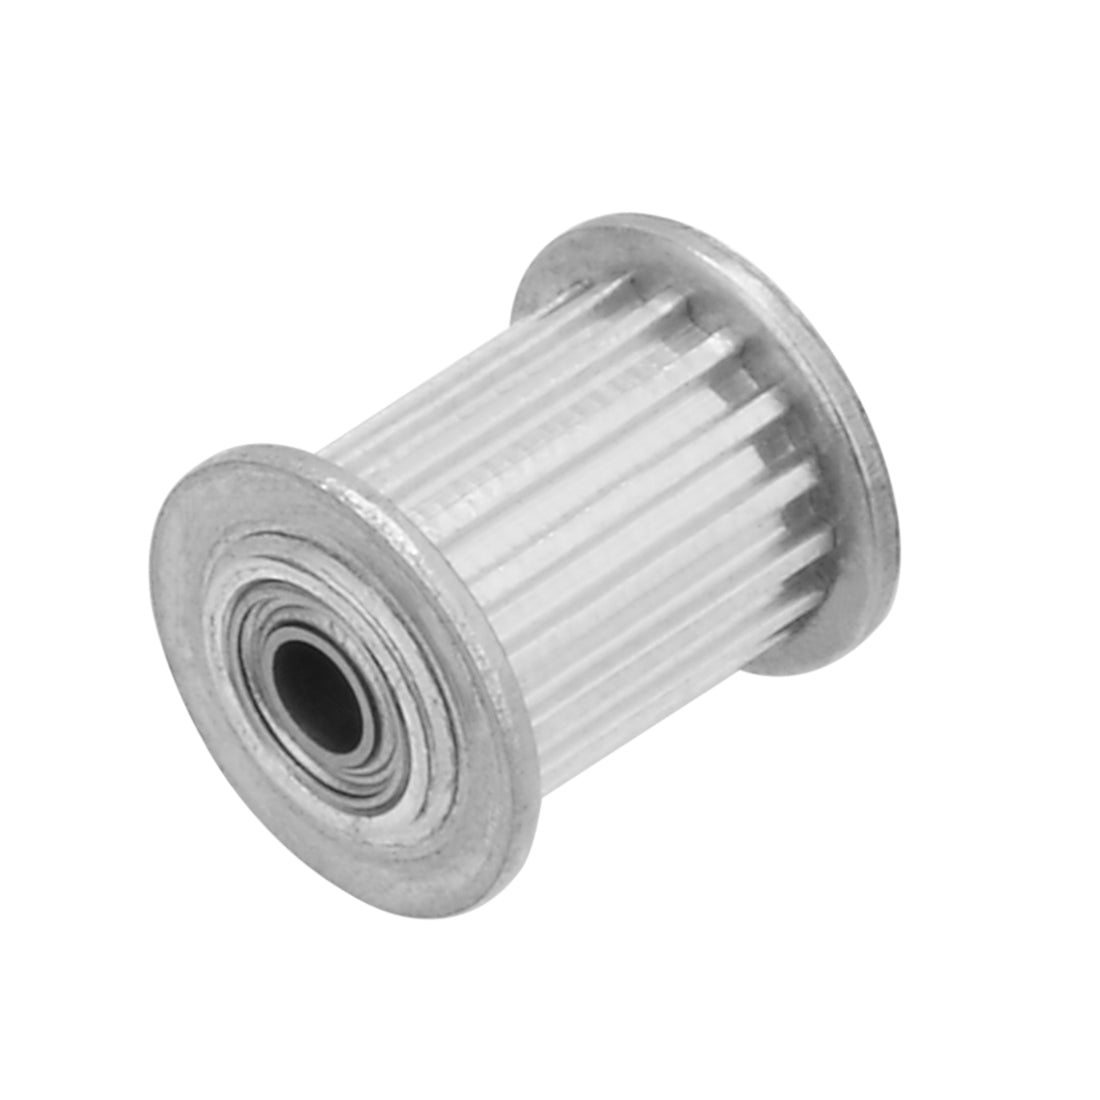 uxcell Uxcell Aluminum  16 Teeth 3mm Bore Timing Belt Idler Pulley Synchronous Wheel 10mm Belt for 3D Printer CNC